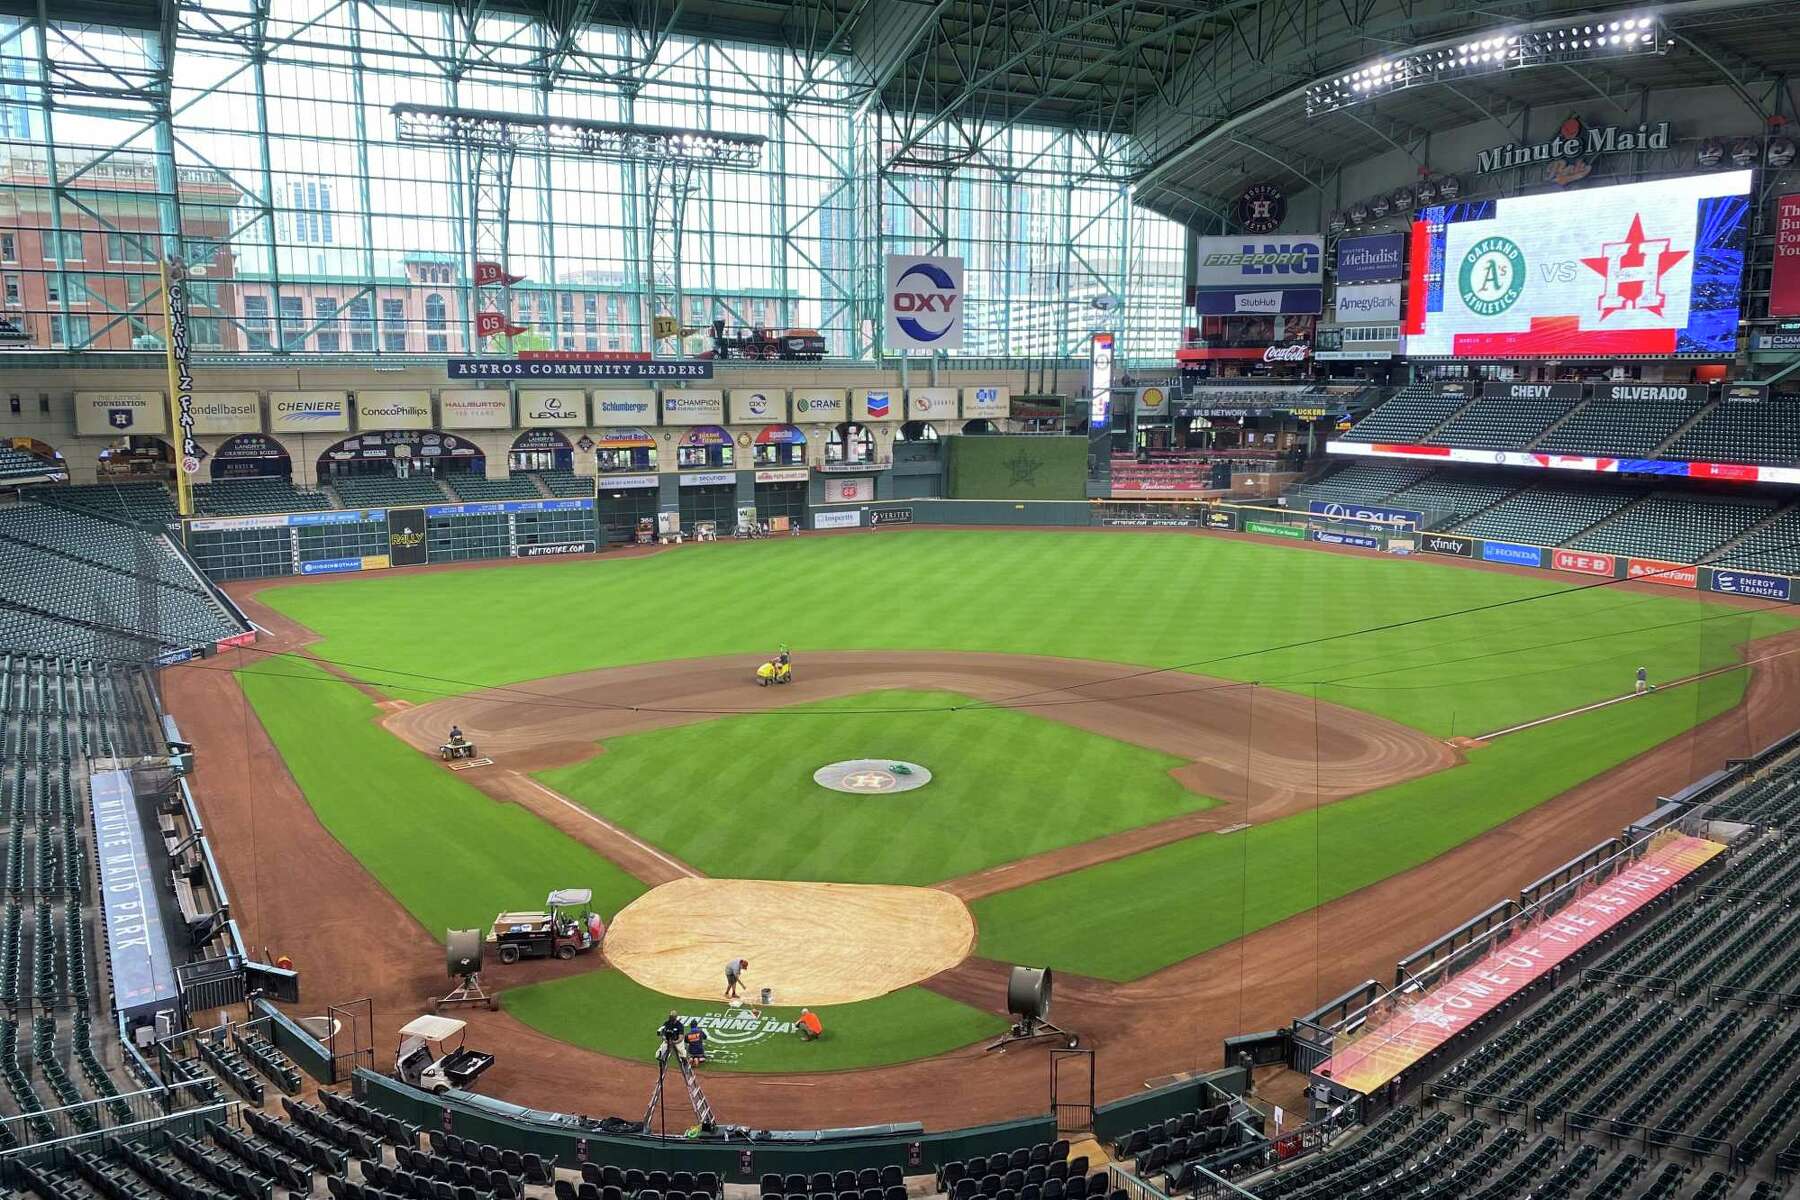 What you can expect when you attend an Astros game this season